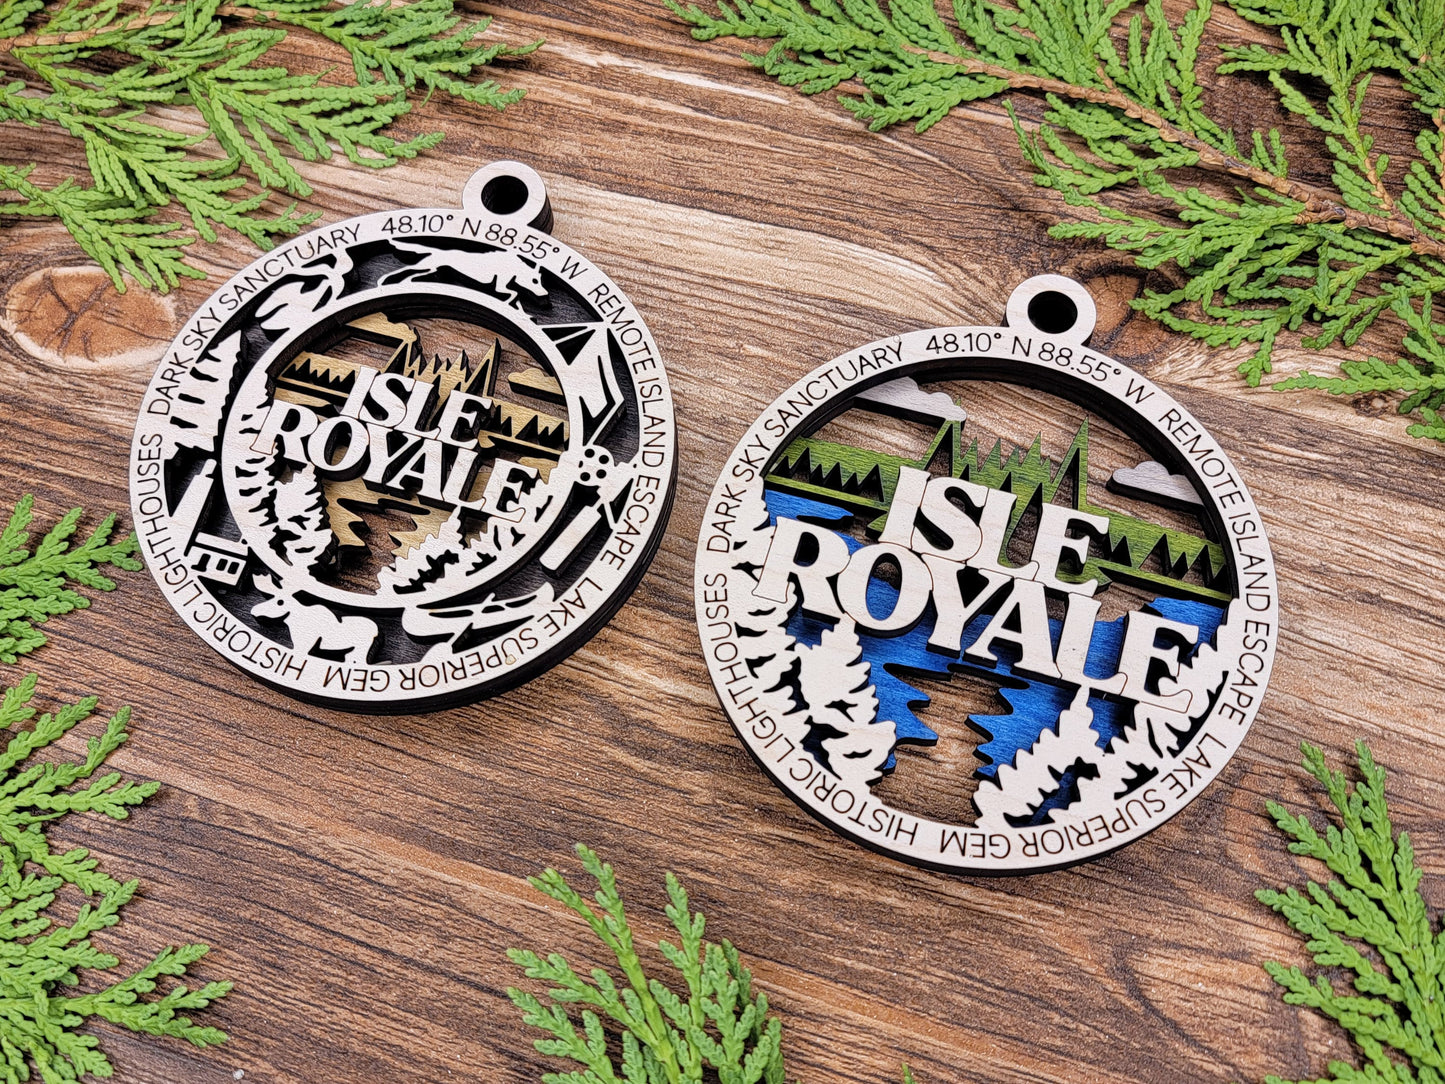 Isle Royale Park Ornament - Includes 2 Ornaments - Laser Design SVG, PDF, AI File Download - Tested On Glowforge and LightBurn